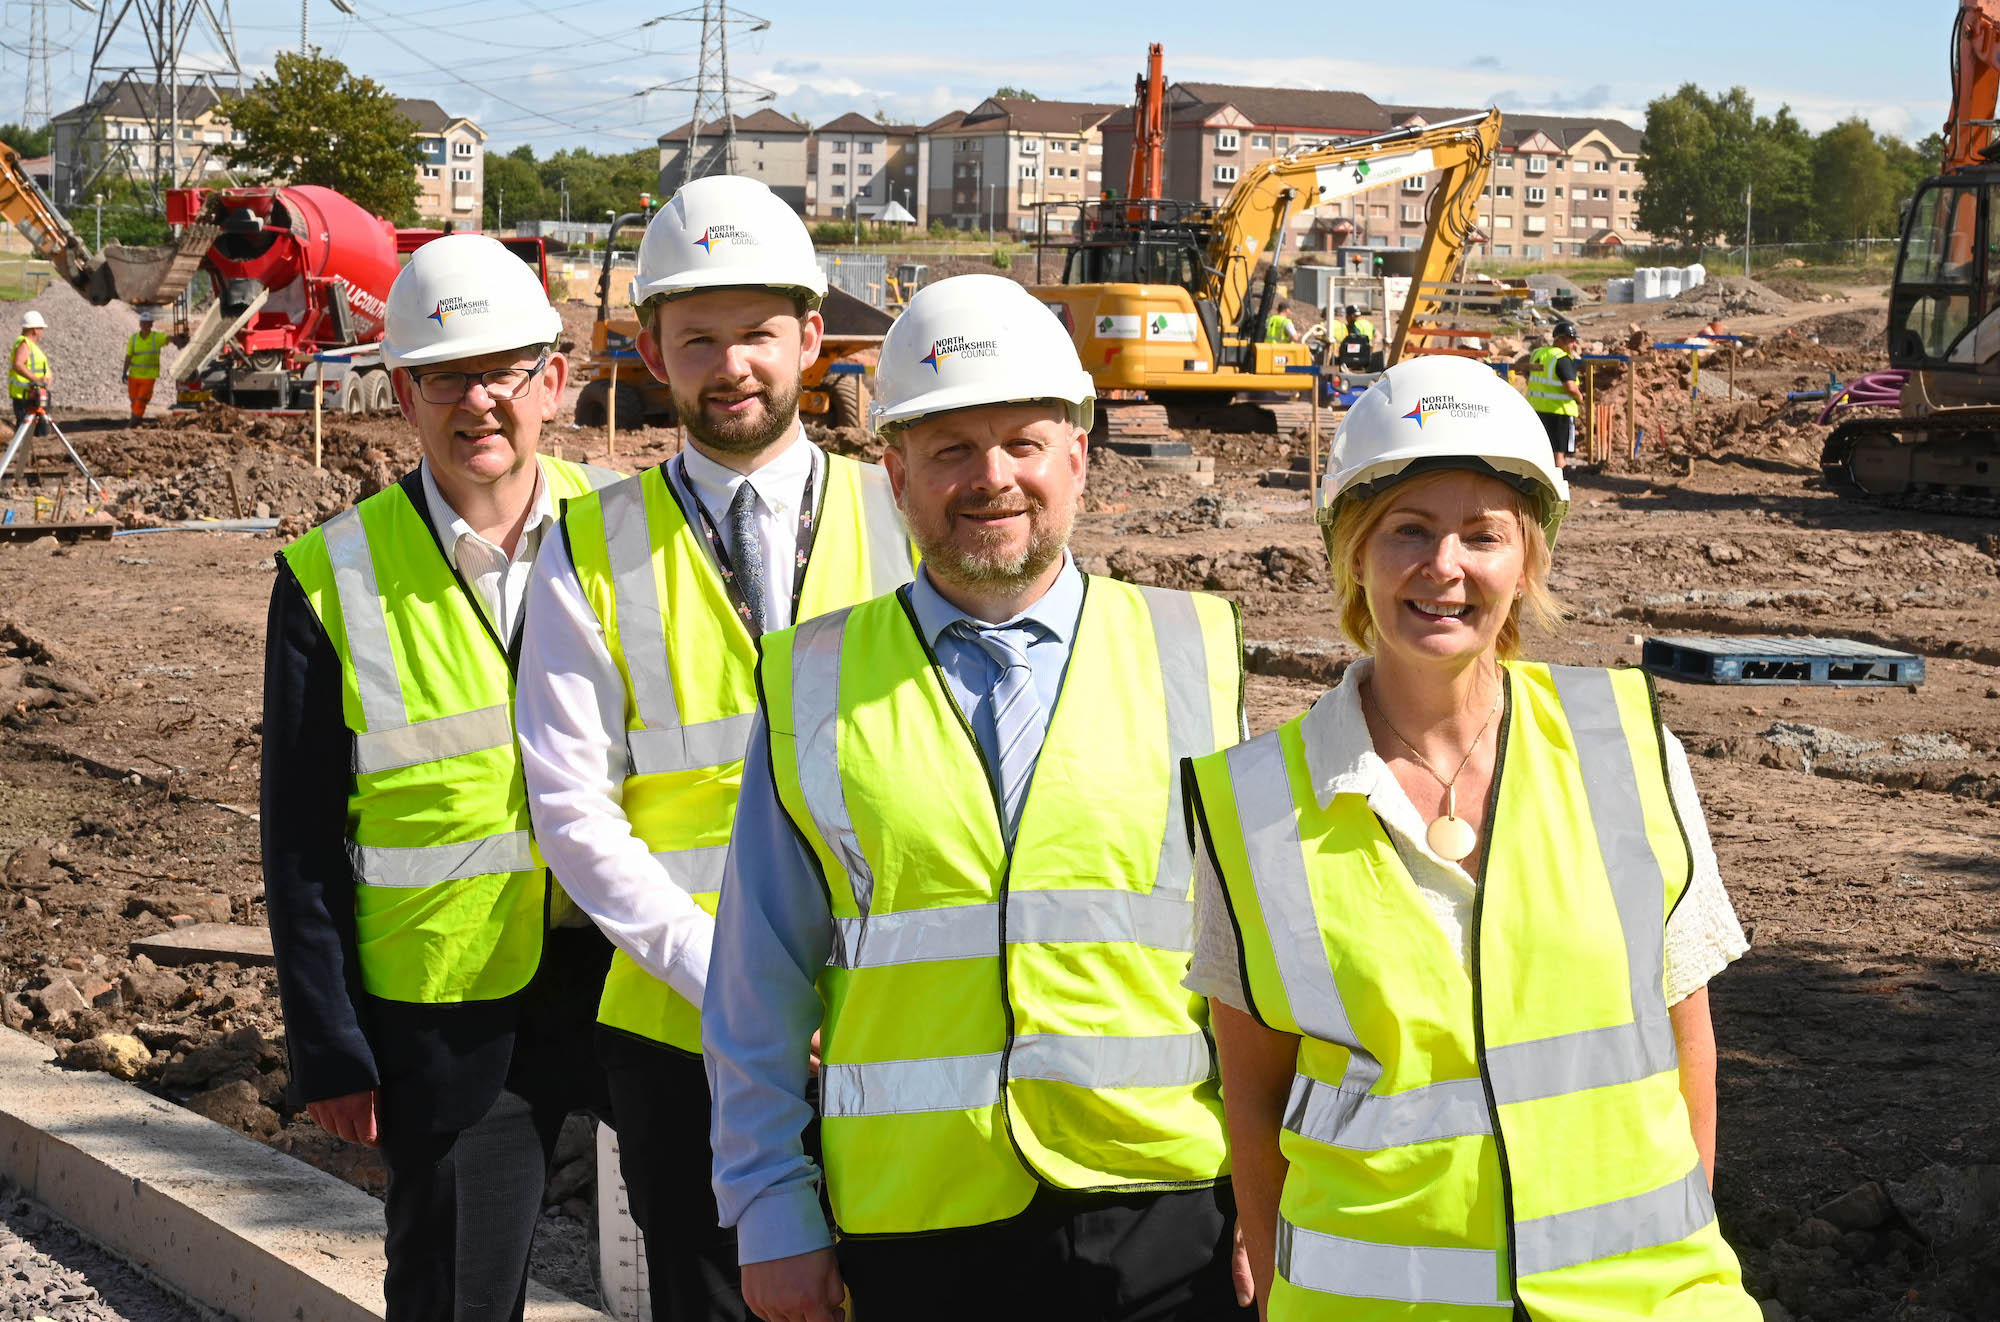 Construction commences on new Gowkthrapple homes